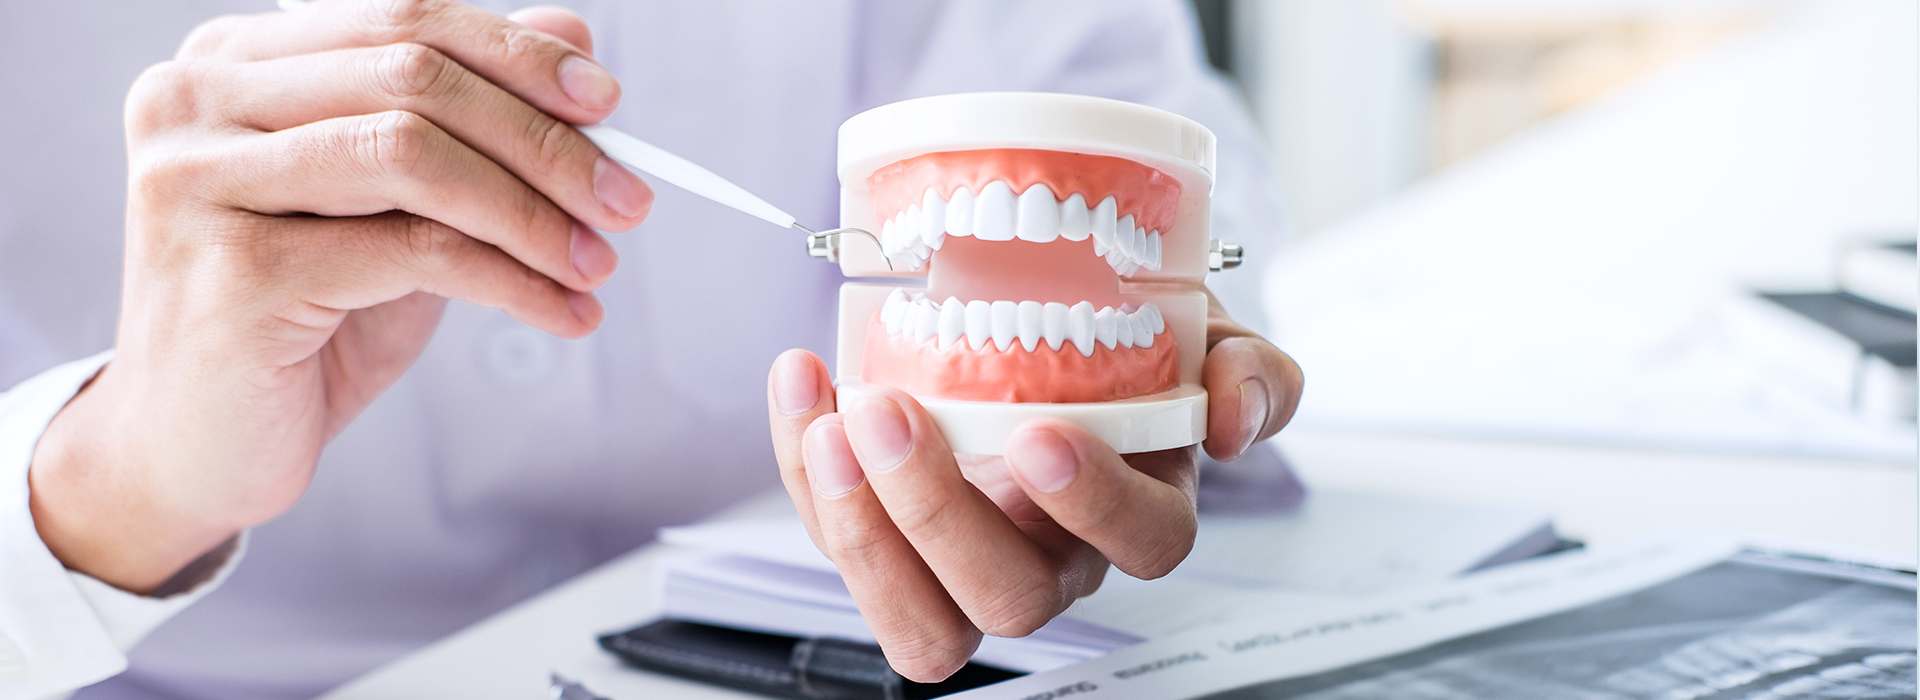 Mann Dental Care | Root Canals, Dental Cleanings and Clear Aligners